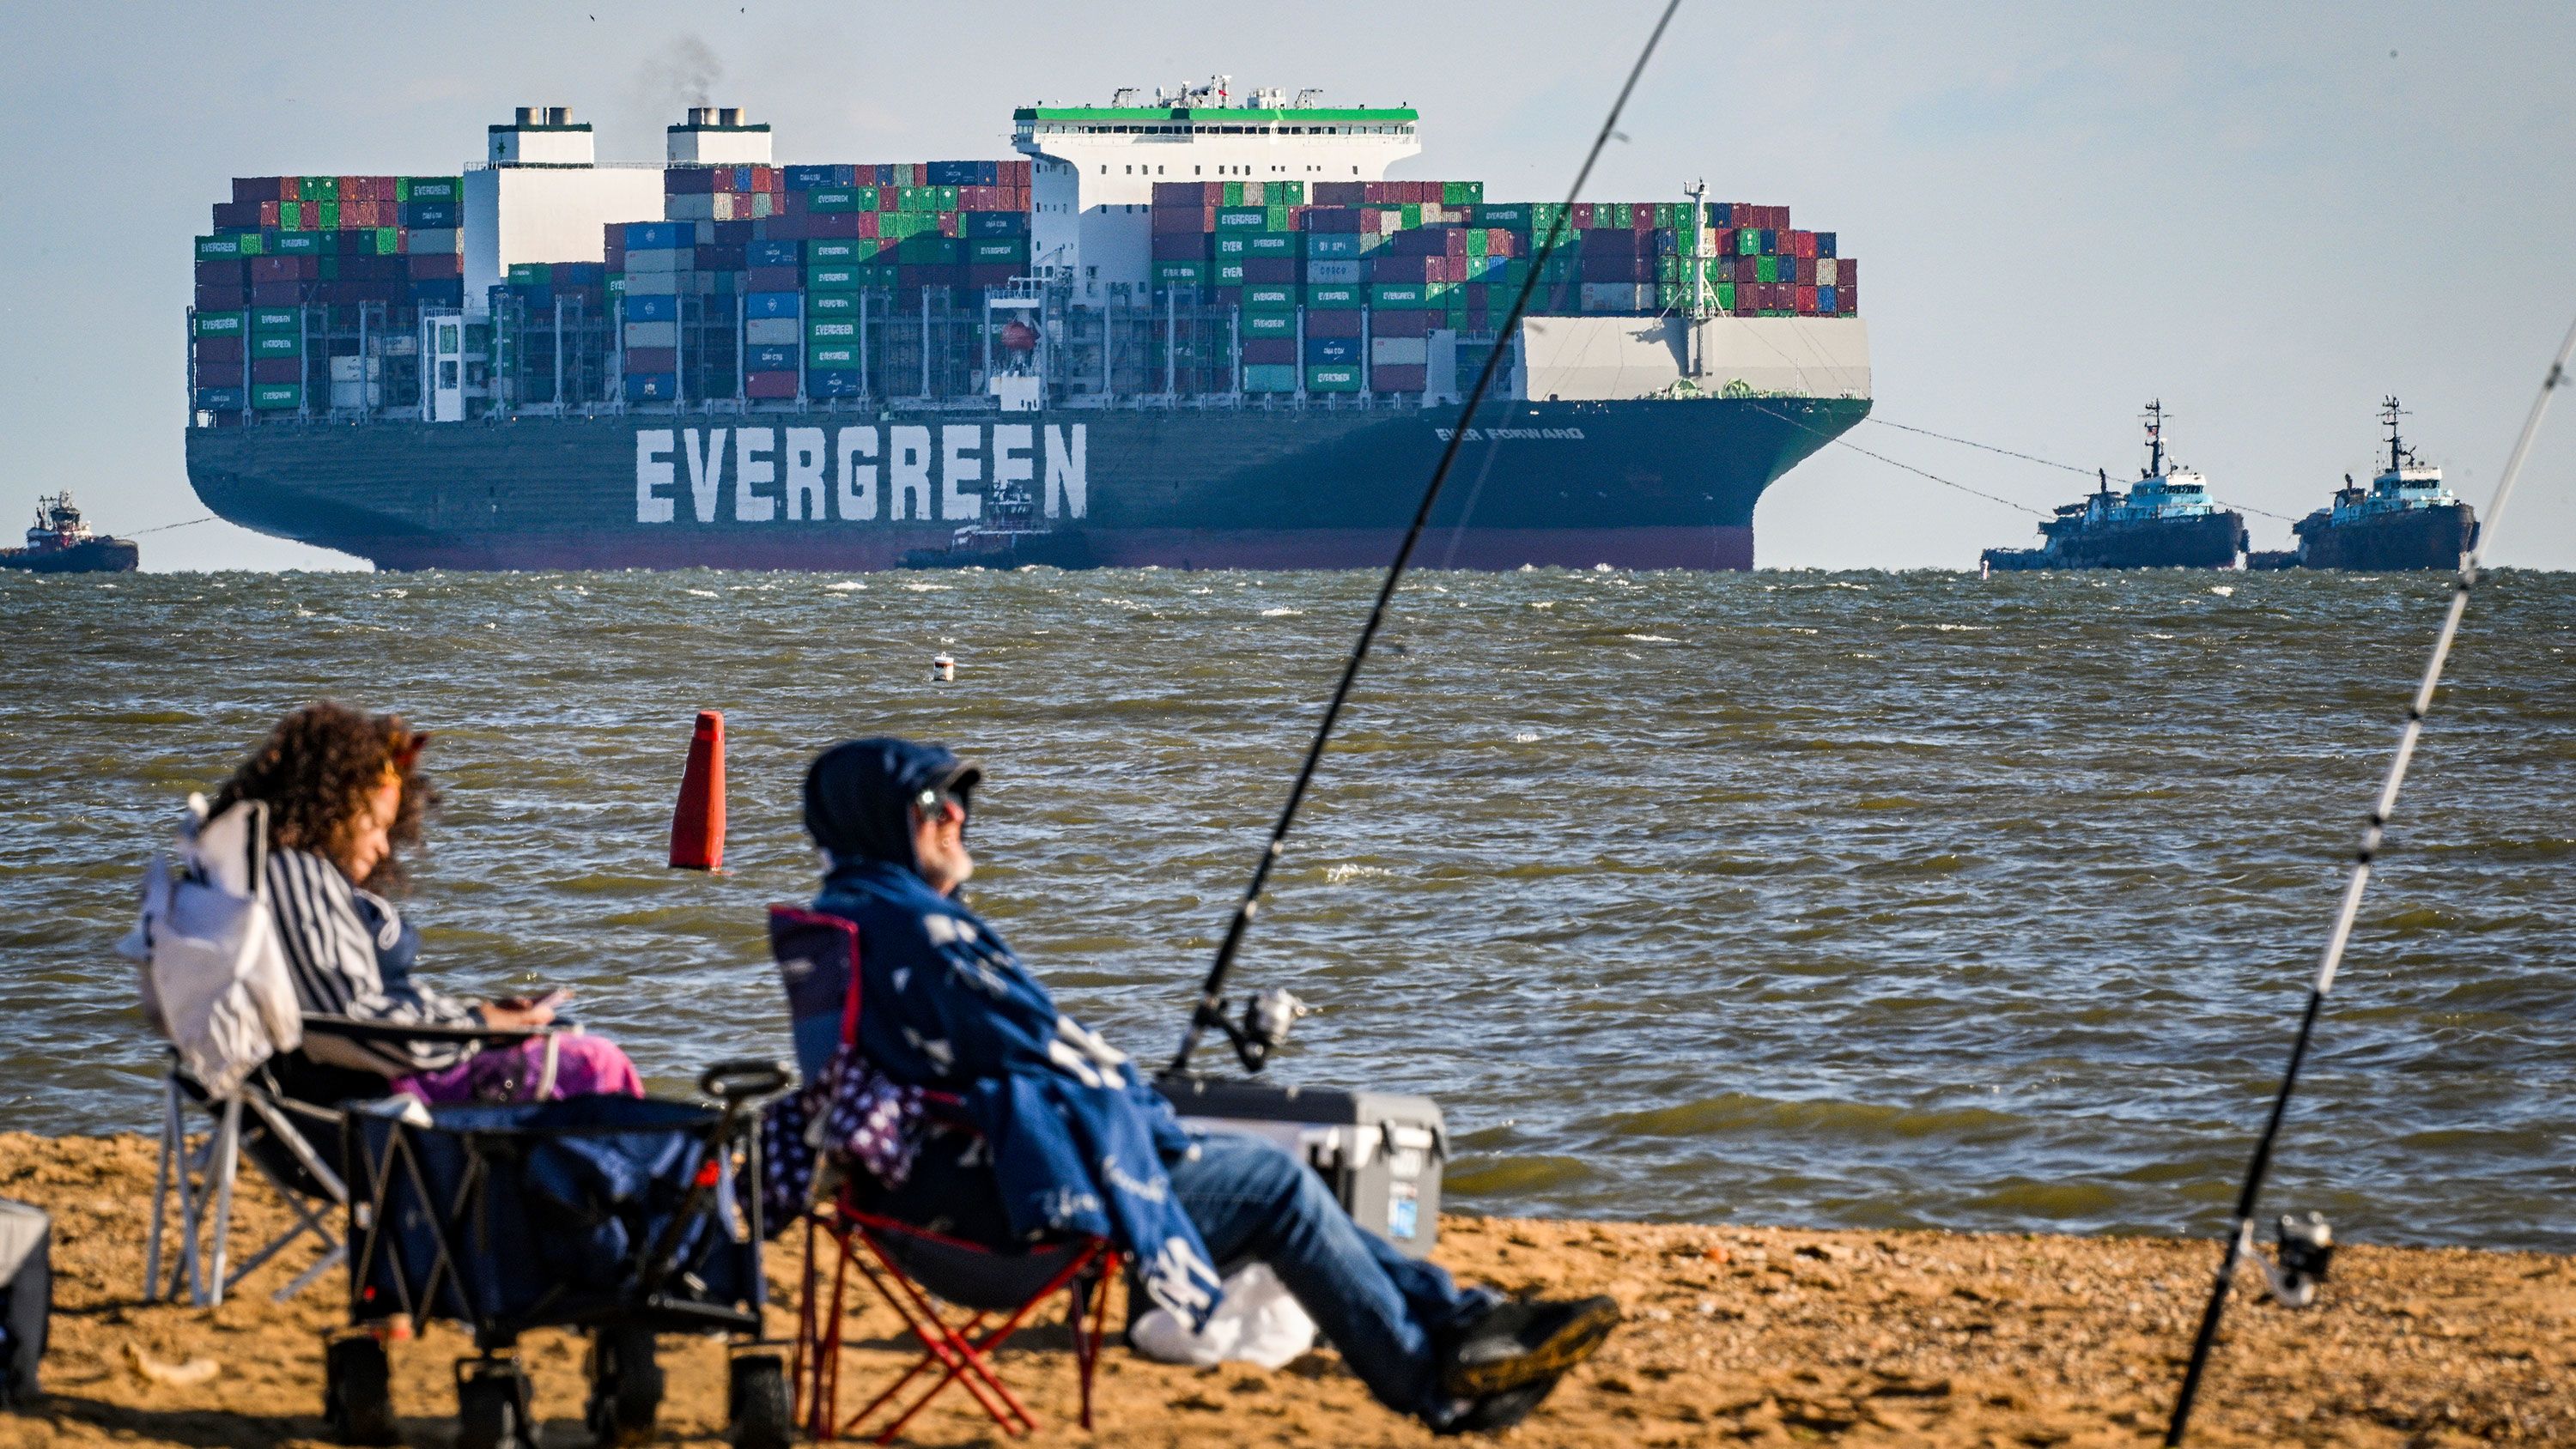 Evergreen container ship freed after a month aground in Chesapeake Bay